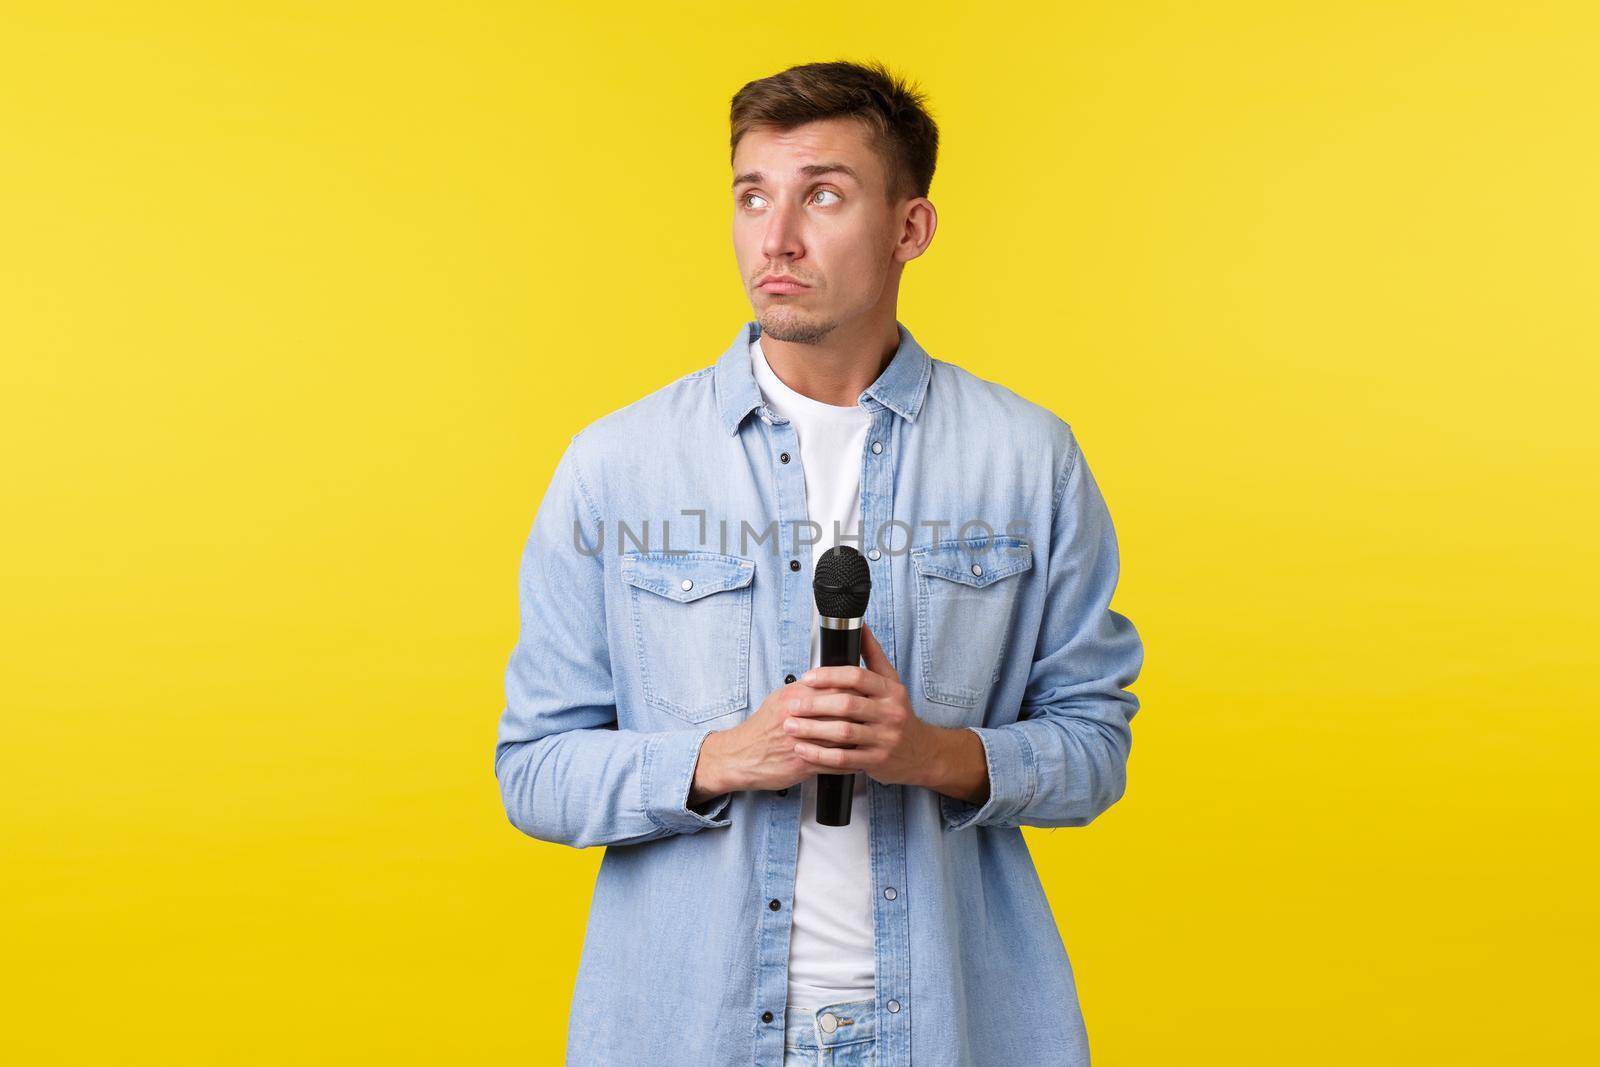 Lifestyle, people emotions and summer leisure concept. Thoughtful dreamy handsome man looking away, thinking as holding microphone, standing yellow background indecisive.